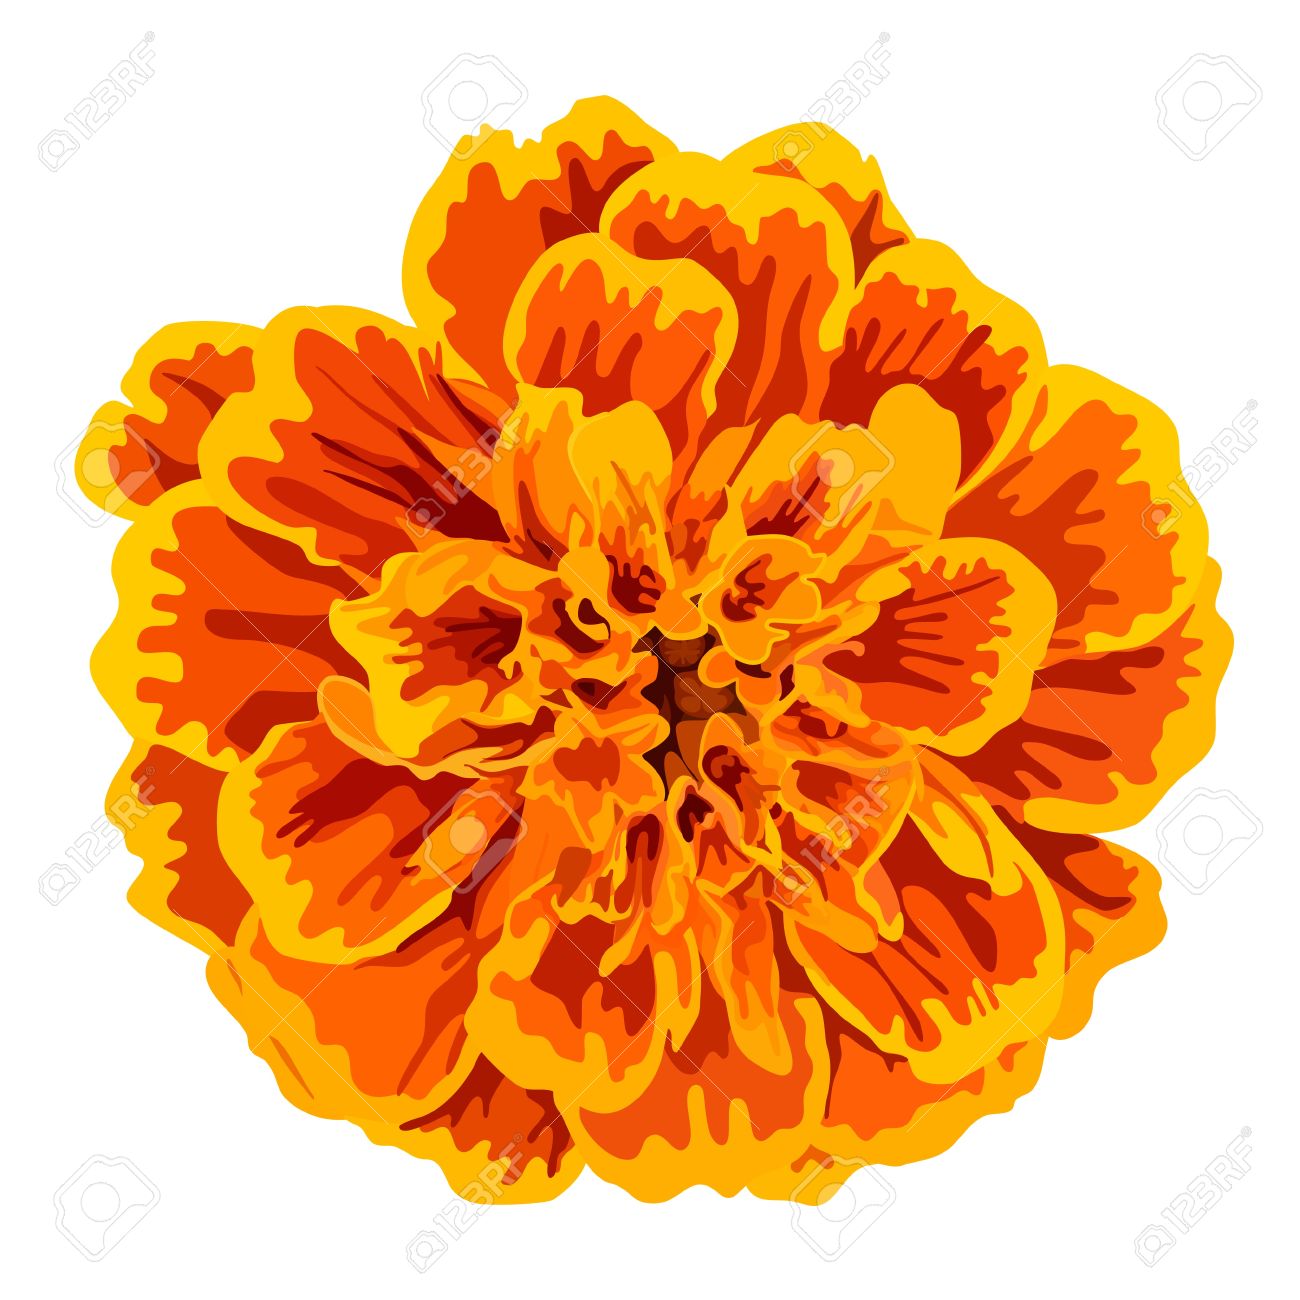 Orange marigolds clipart 20 free Cliparts | Download images on